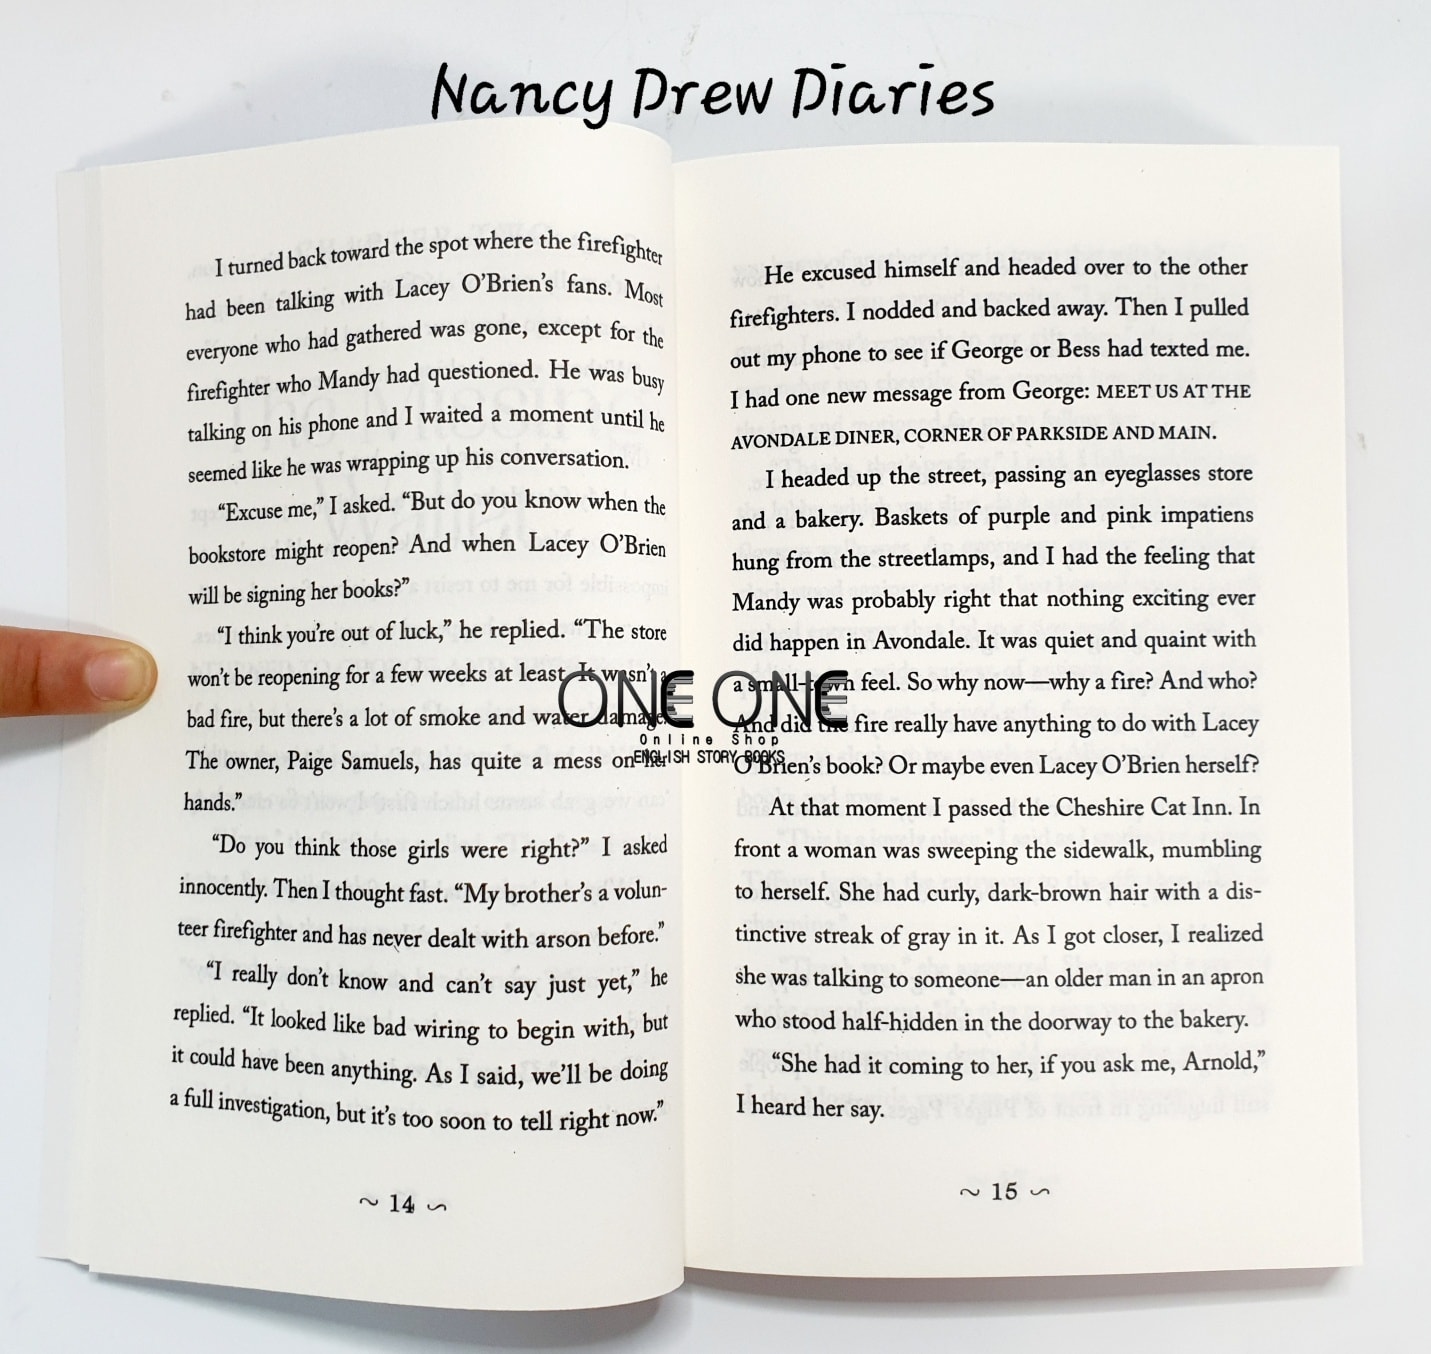 Nancy Drew Diaries Supersleuth Collection (Sách nhập) - 10 quyển